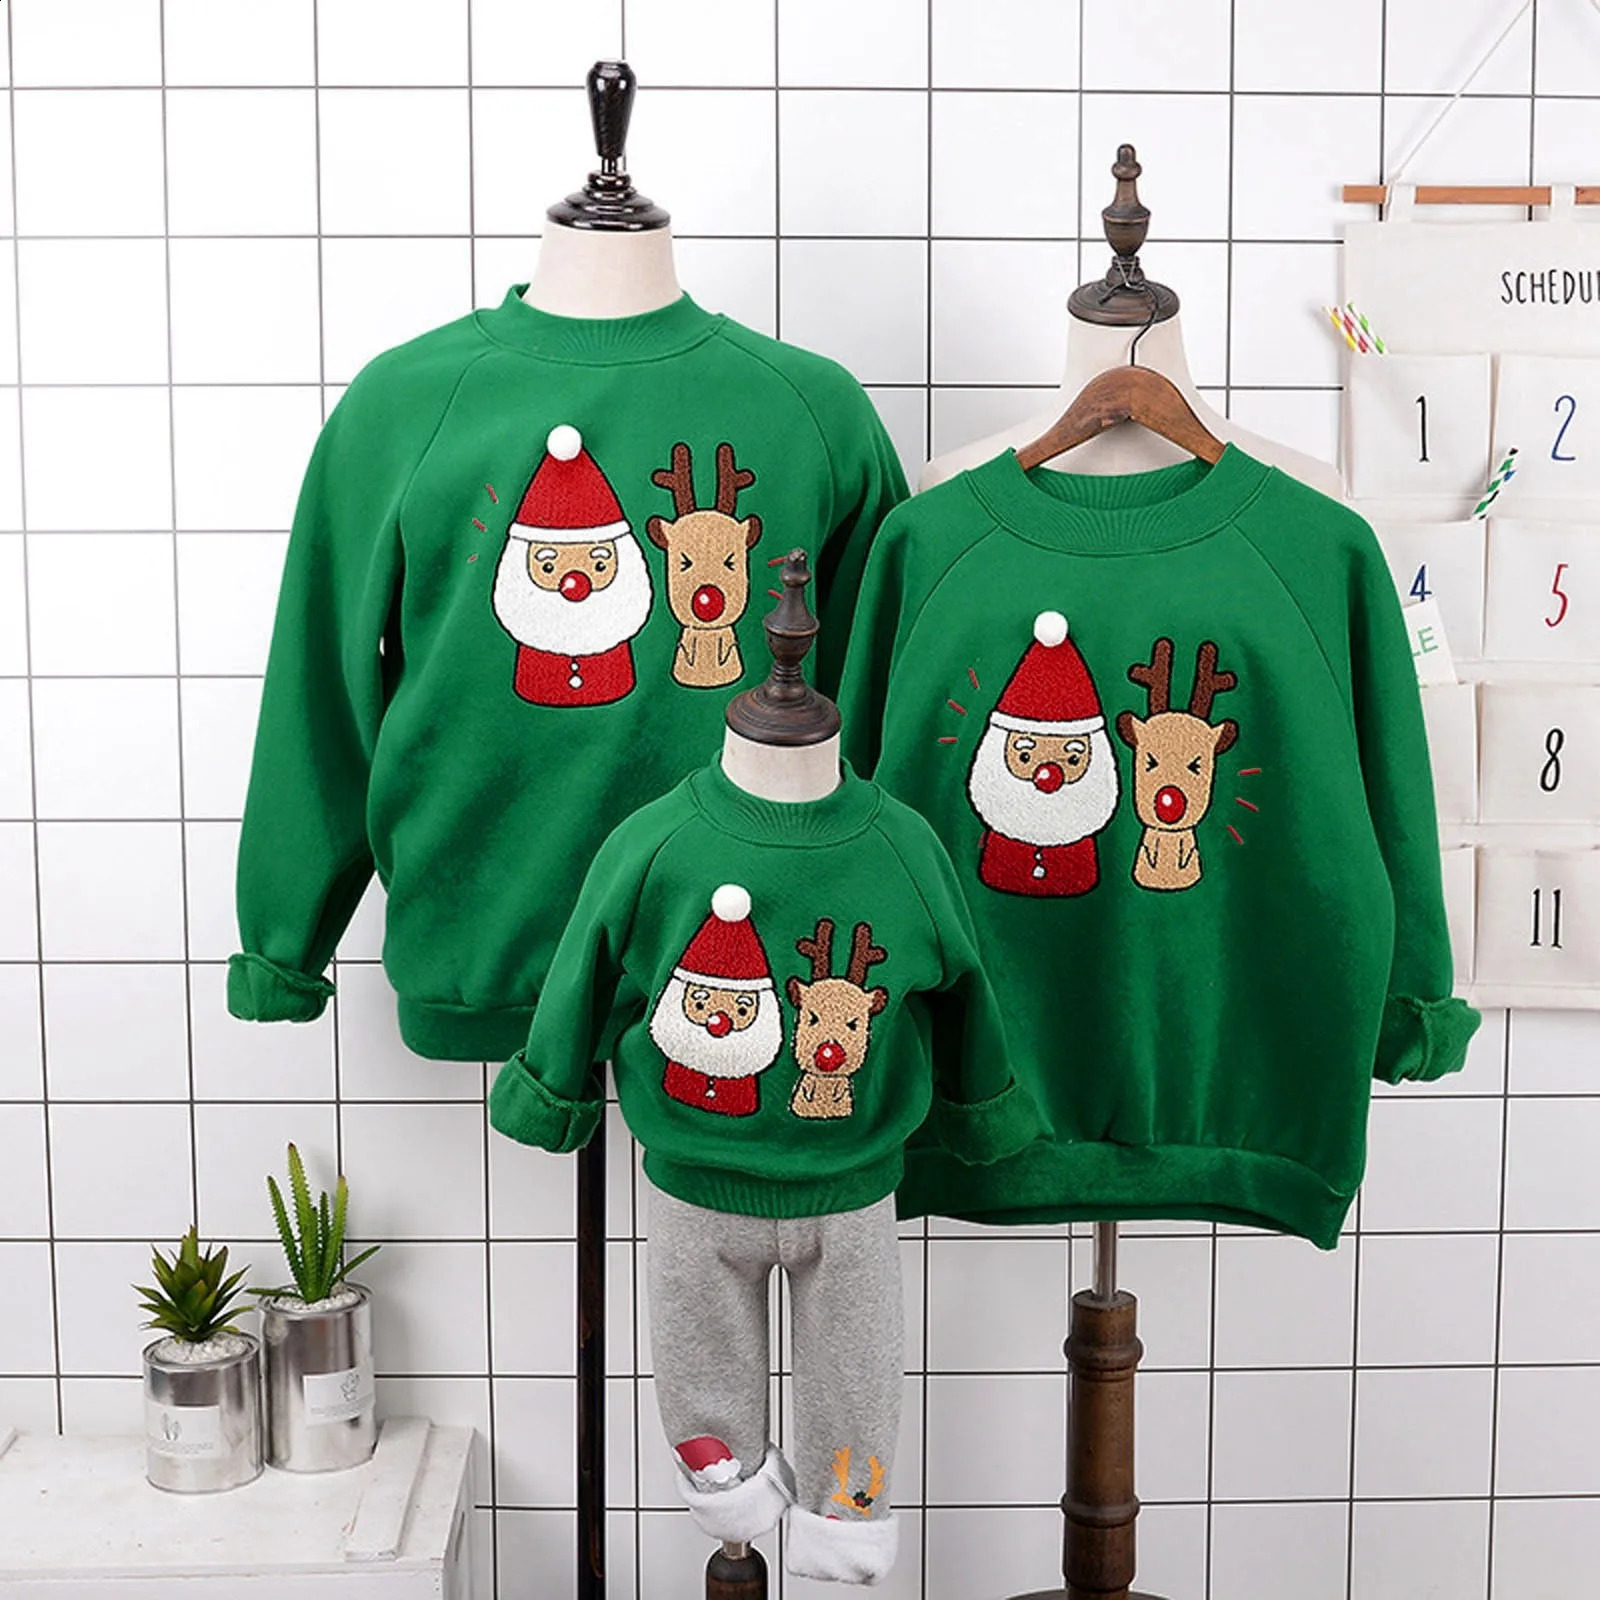 Family Matching Outfits Santa Claus Embroidery Crewneck Long Sleeve Sweatshirts Casual Holiday Christmas Hoodies Parent Child Clothes 231118